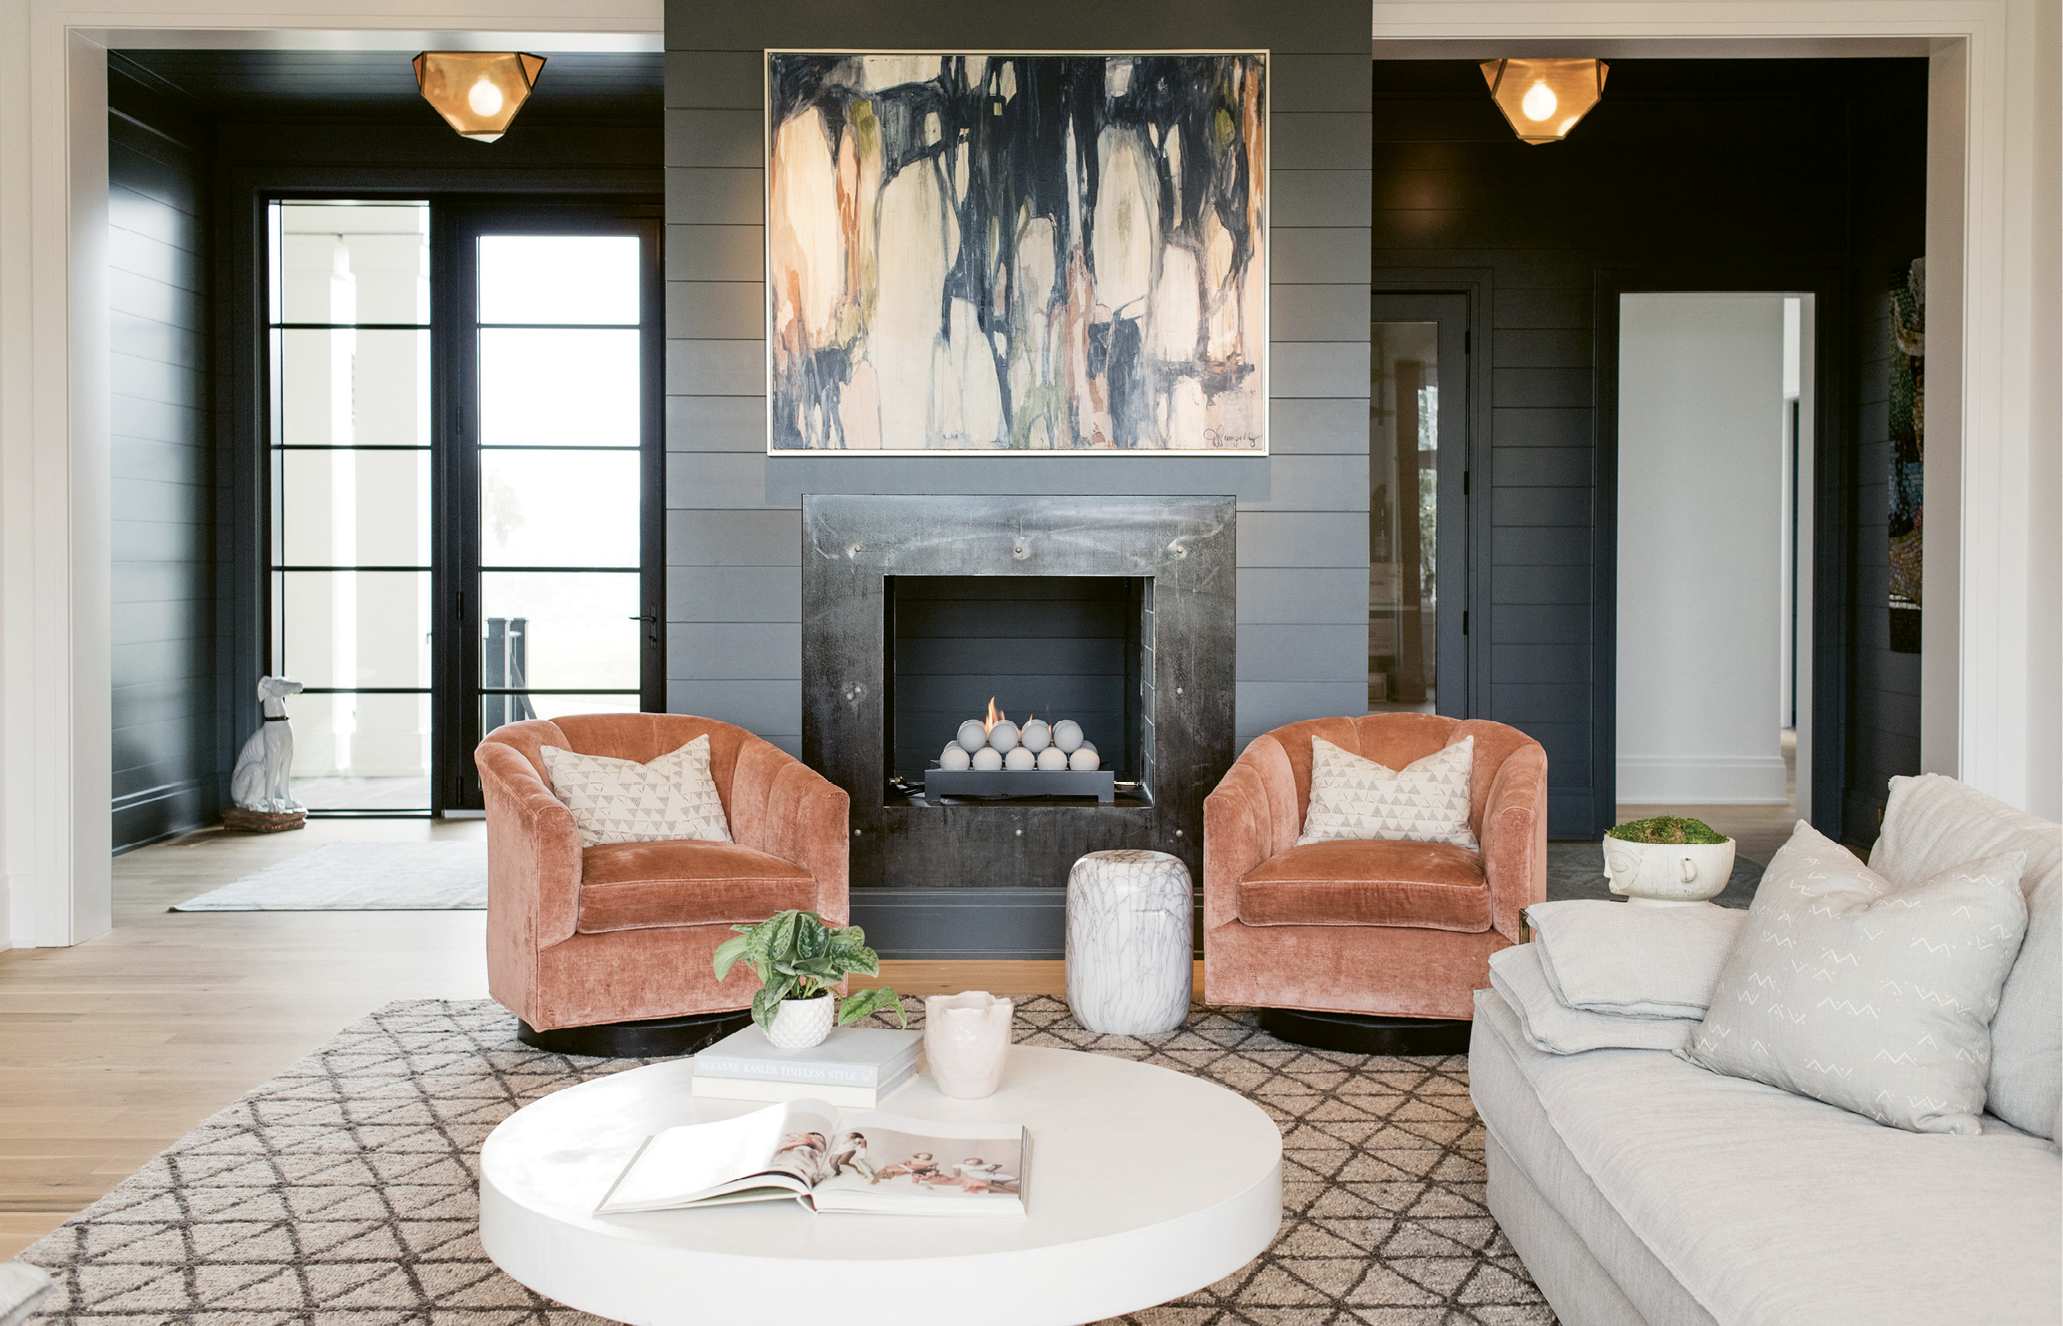 The moody foyer, crushed velvet chairs, and abstract painting by Jill Pumpelly add depth to the living room’s neutral palette.